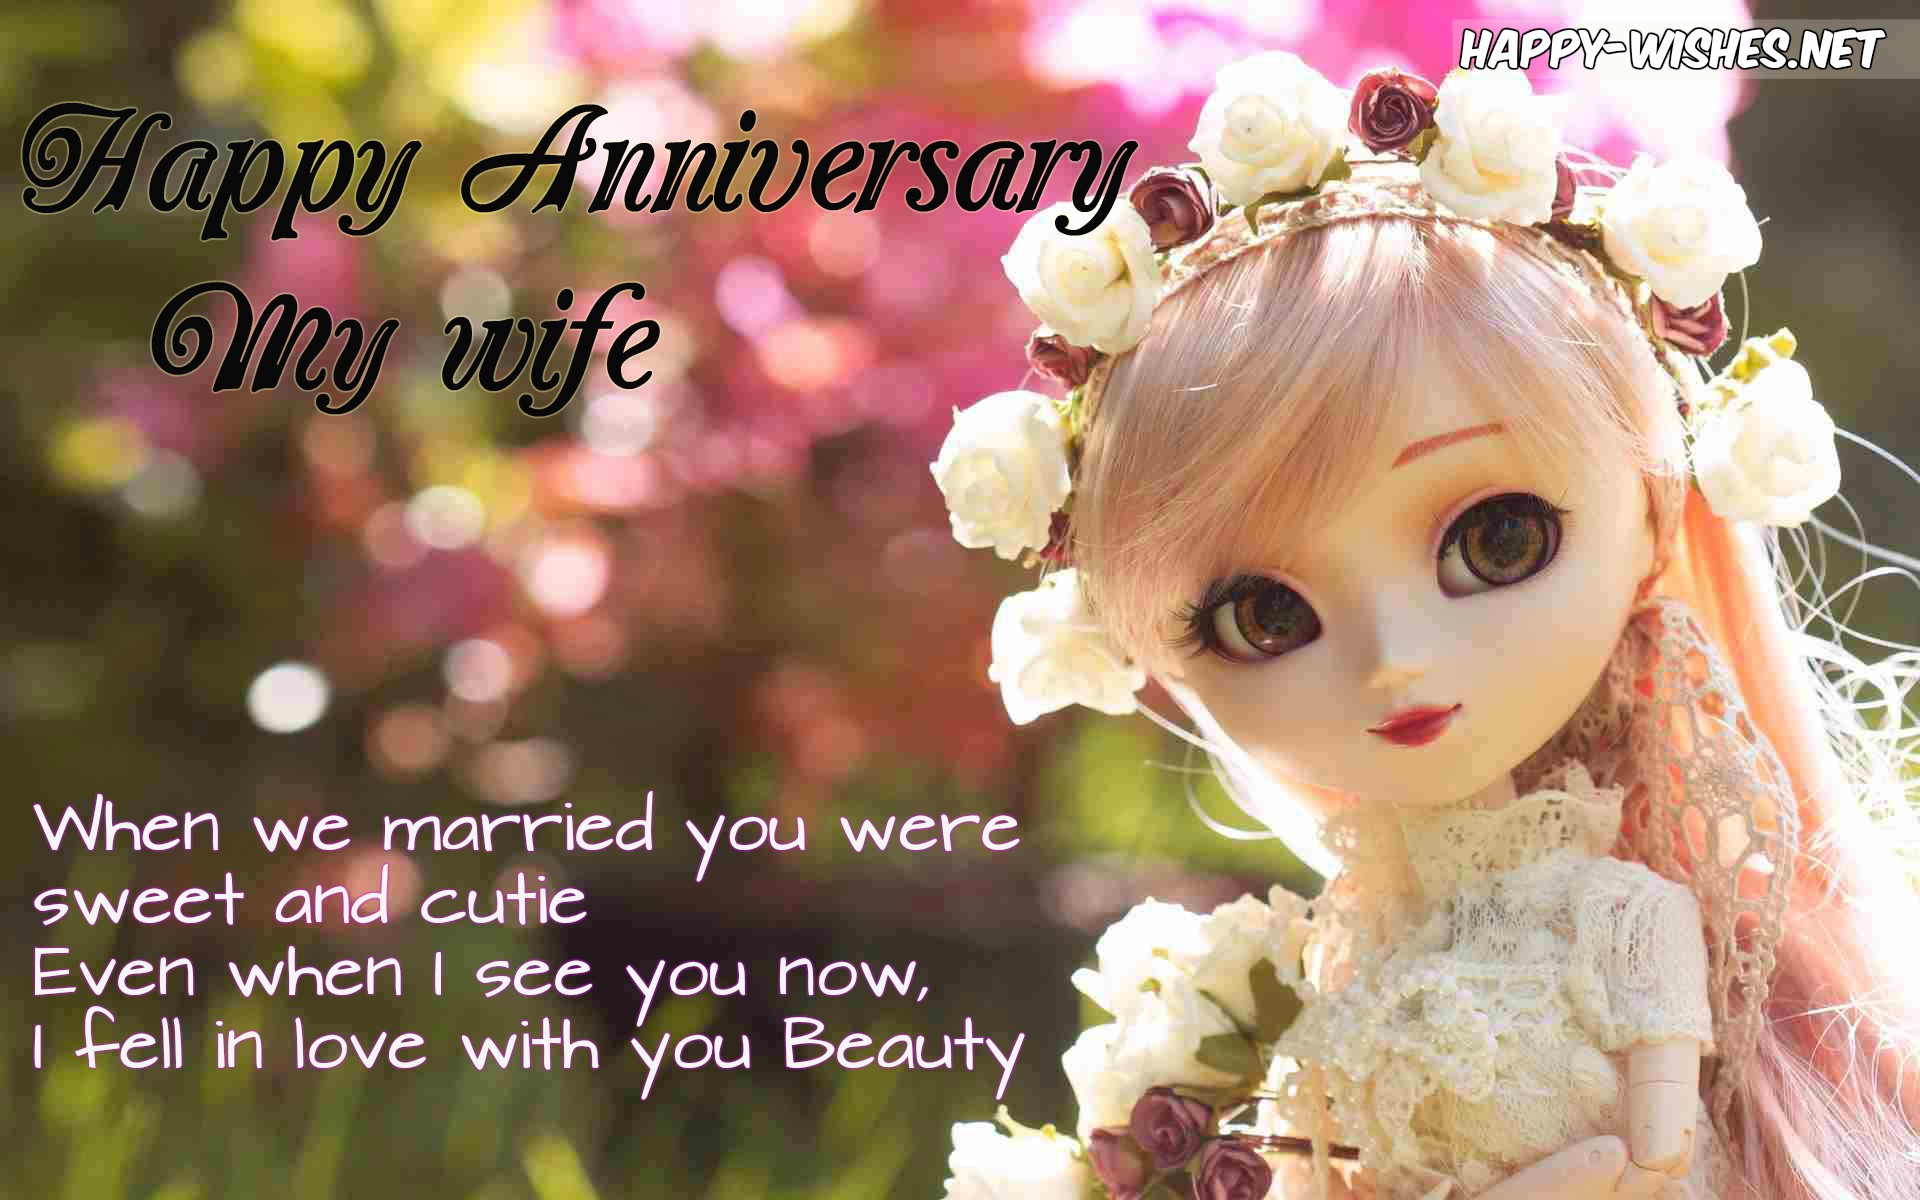 Happy Anniversary Messages for wife